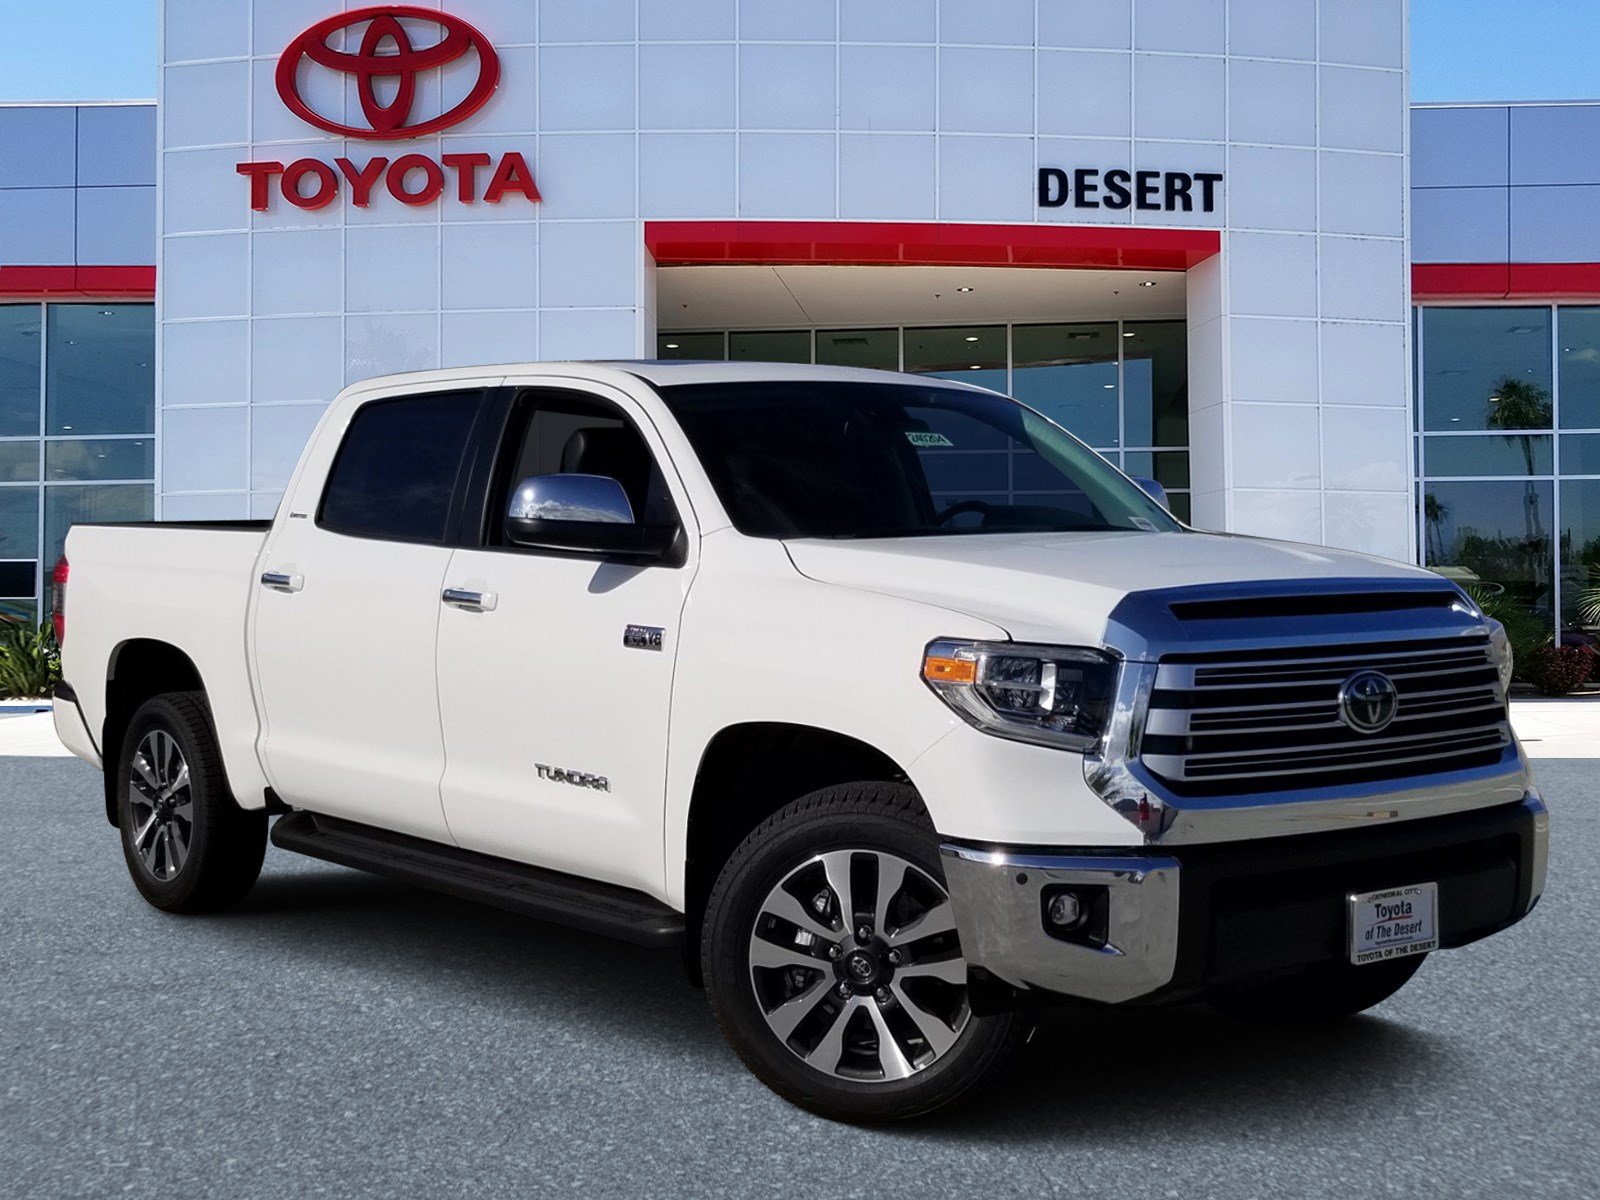 New 2020 Toyota Tundra 2WD Limited Crew Cab Pickup in Cathedral City